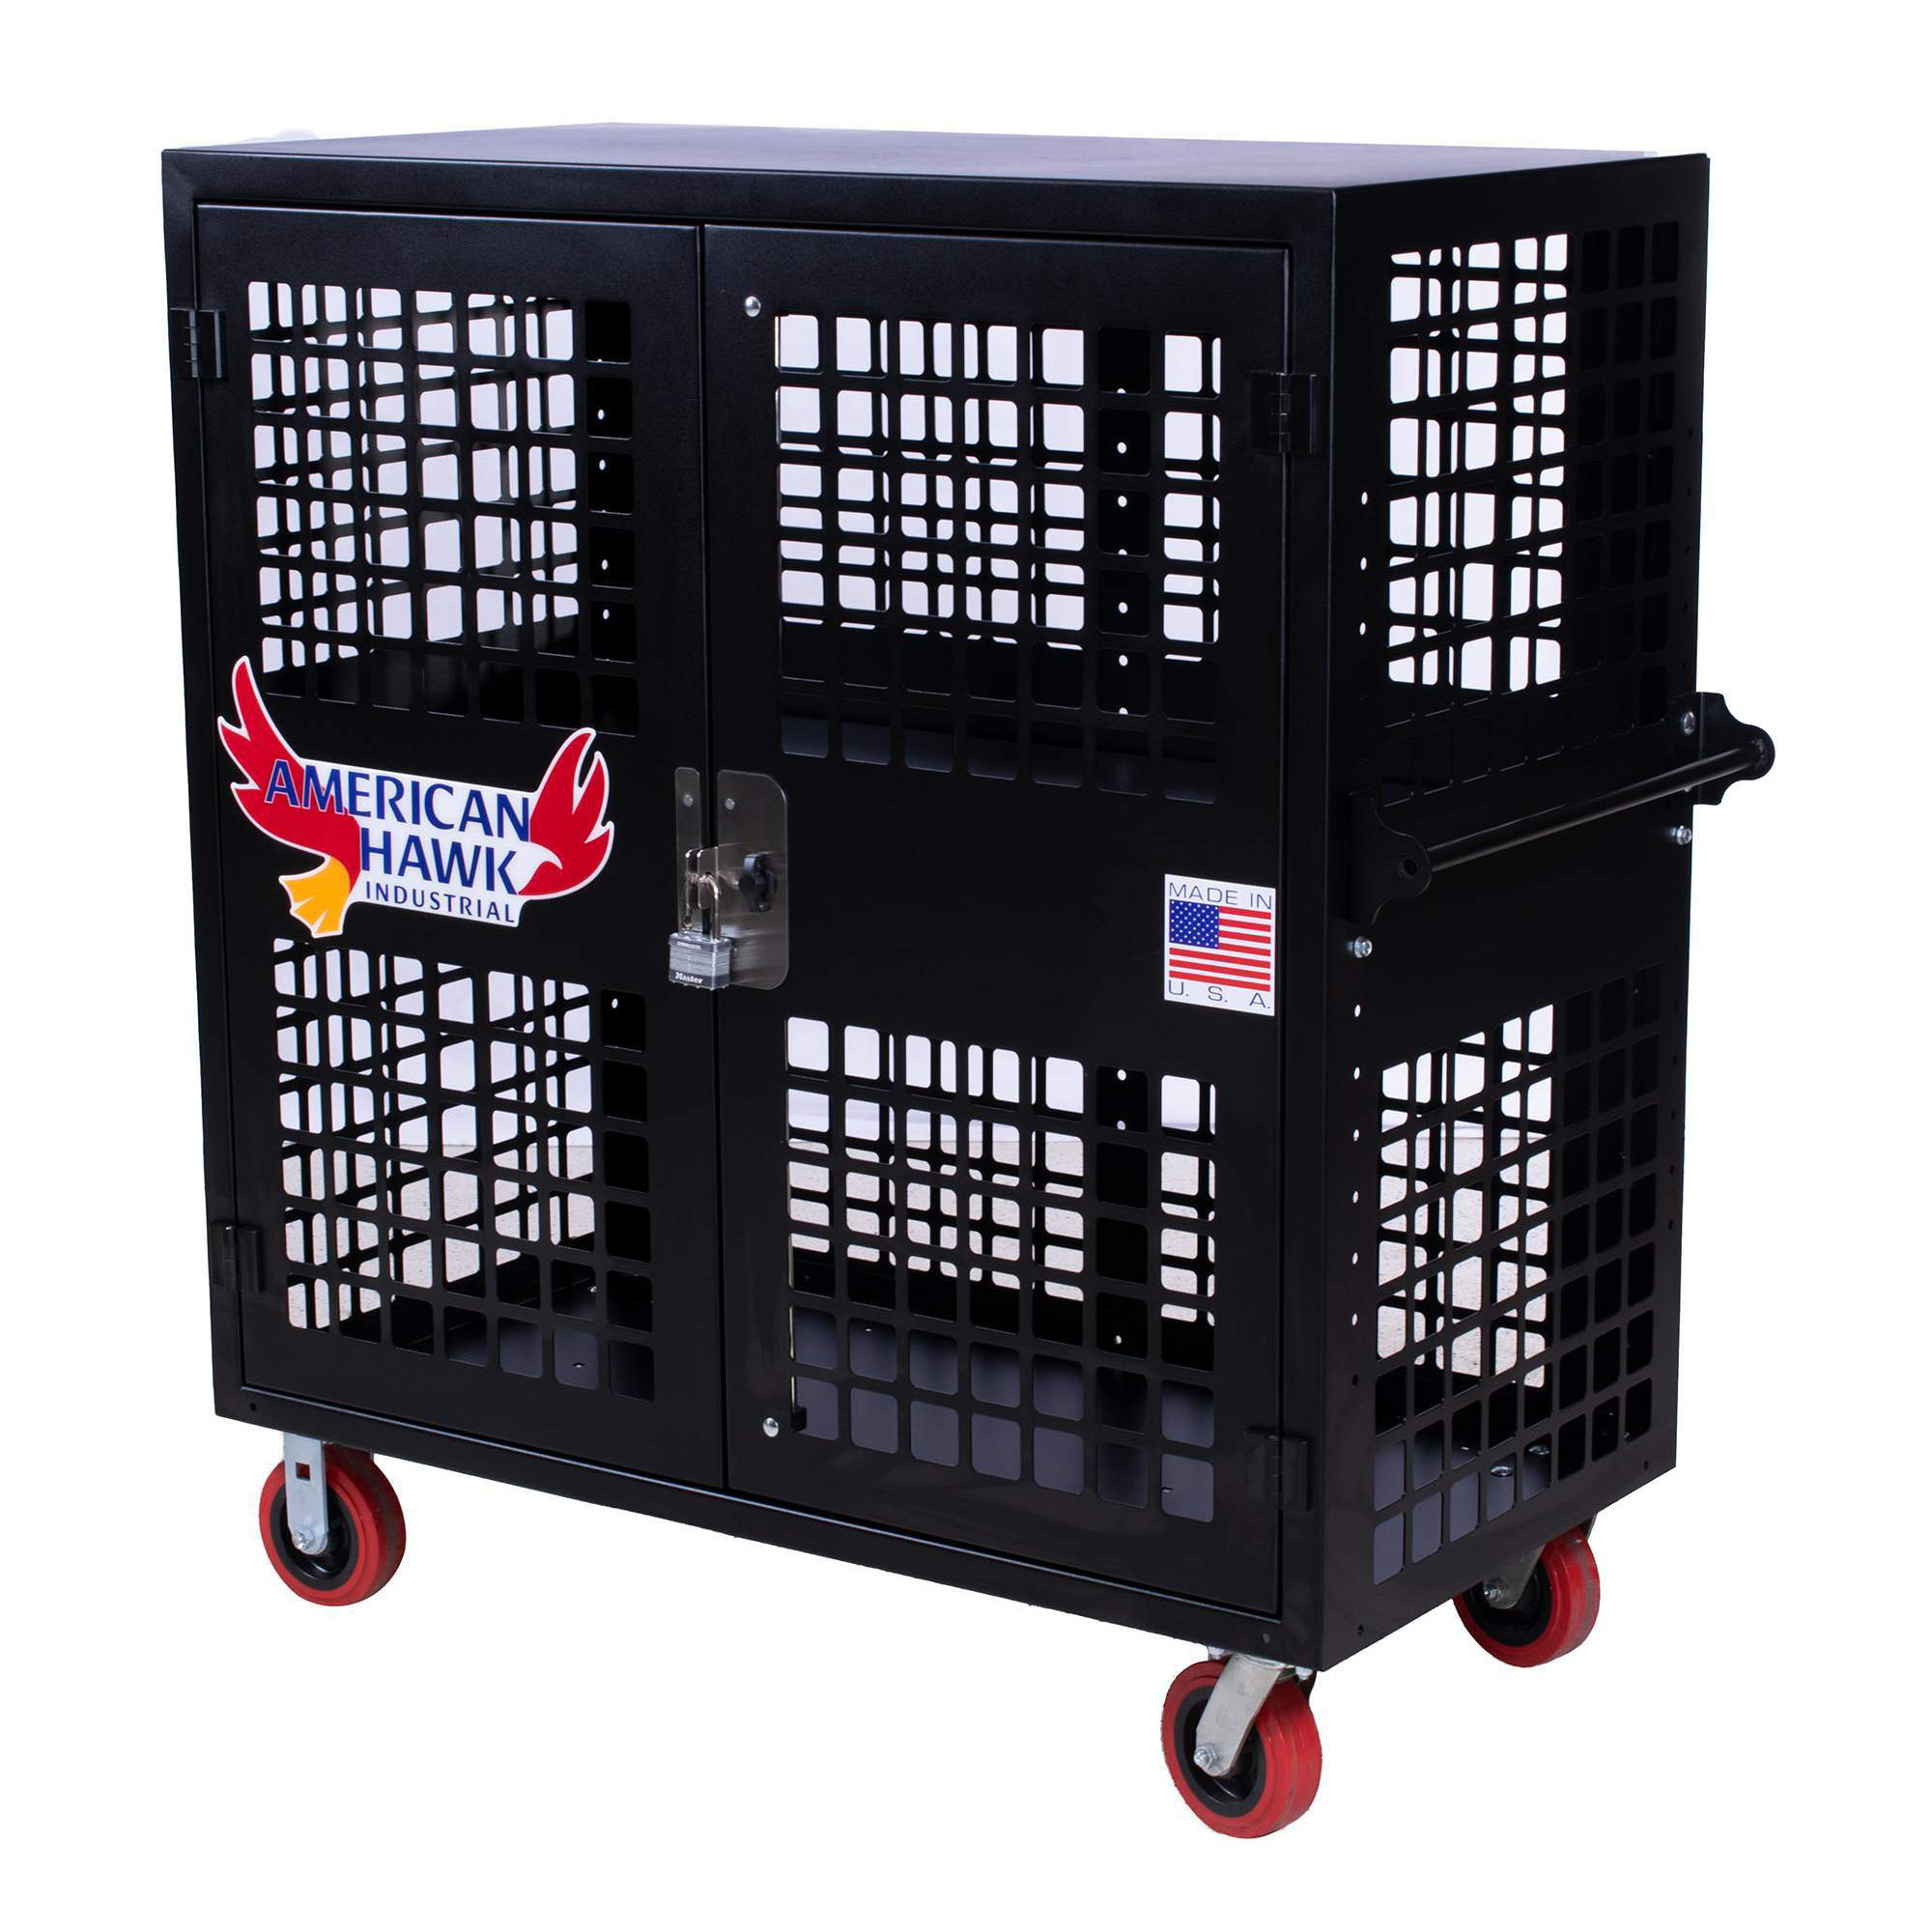 Security Carts, Industrial Security Rolling Cart, Locking Cage, Shop Equipment, 48″ x 24″ Rolling Security Cart, AH1550 Security Cart, American Hawk Industrial, Dee-Blast